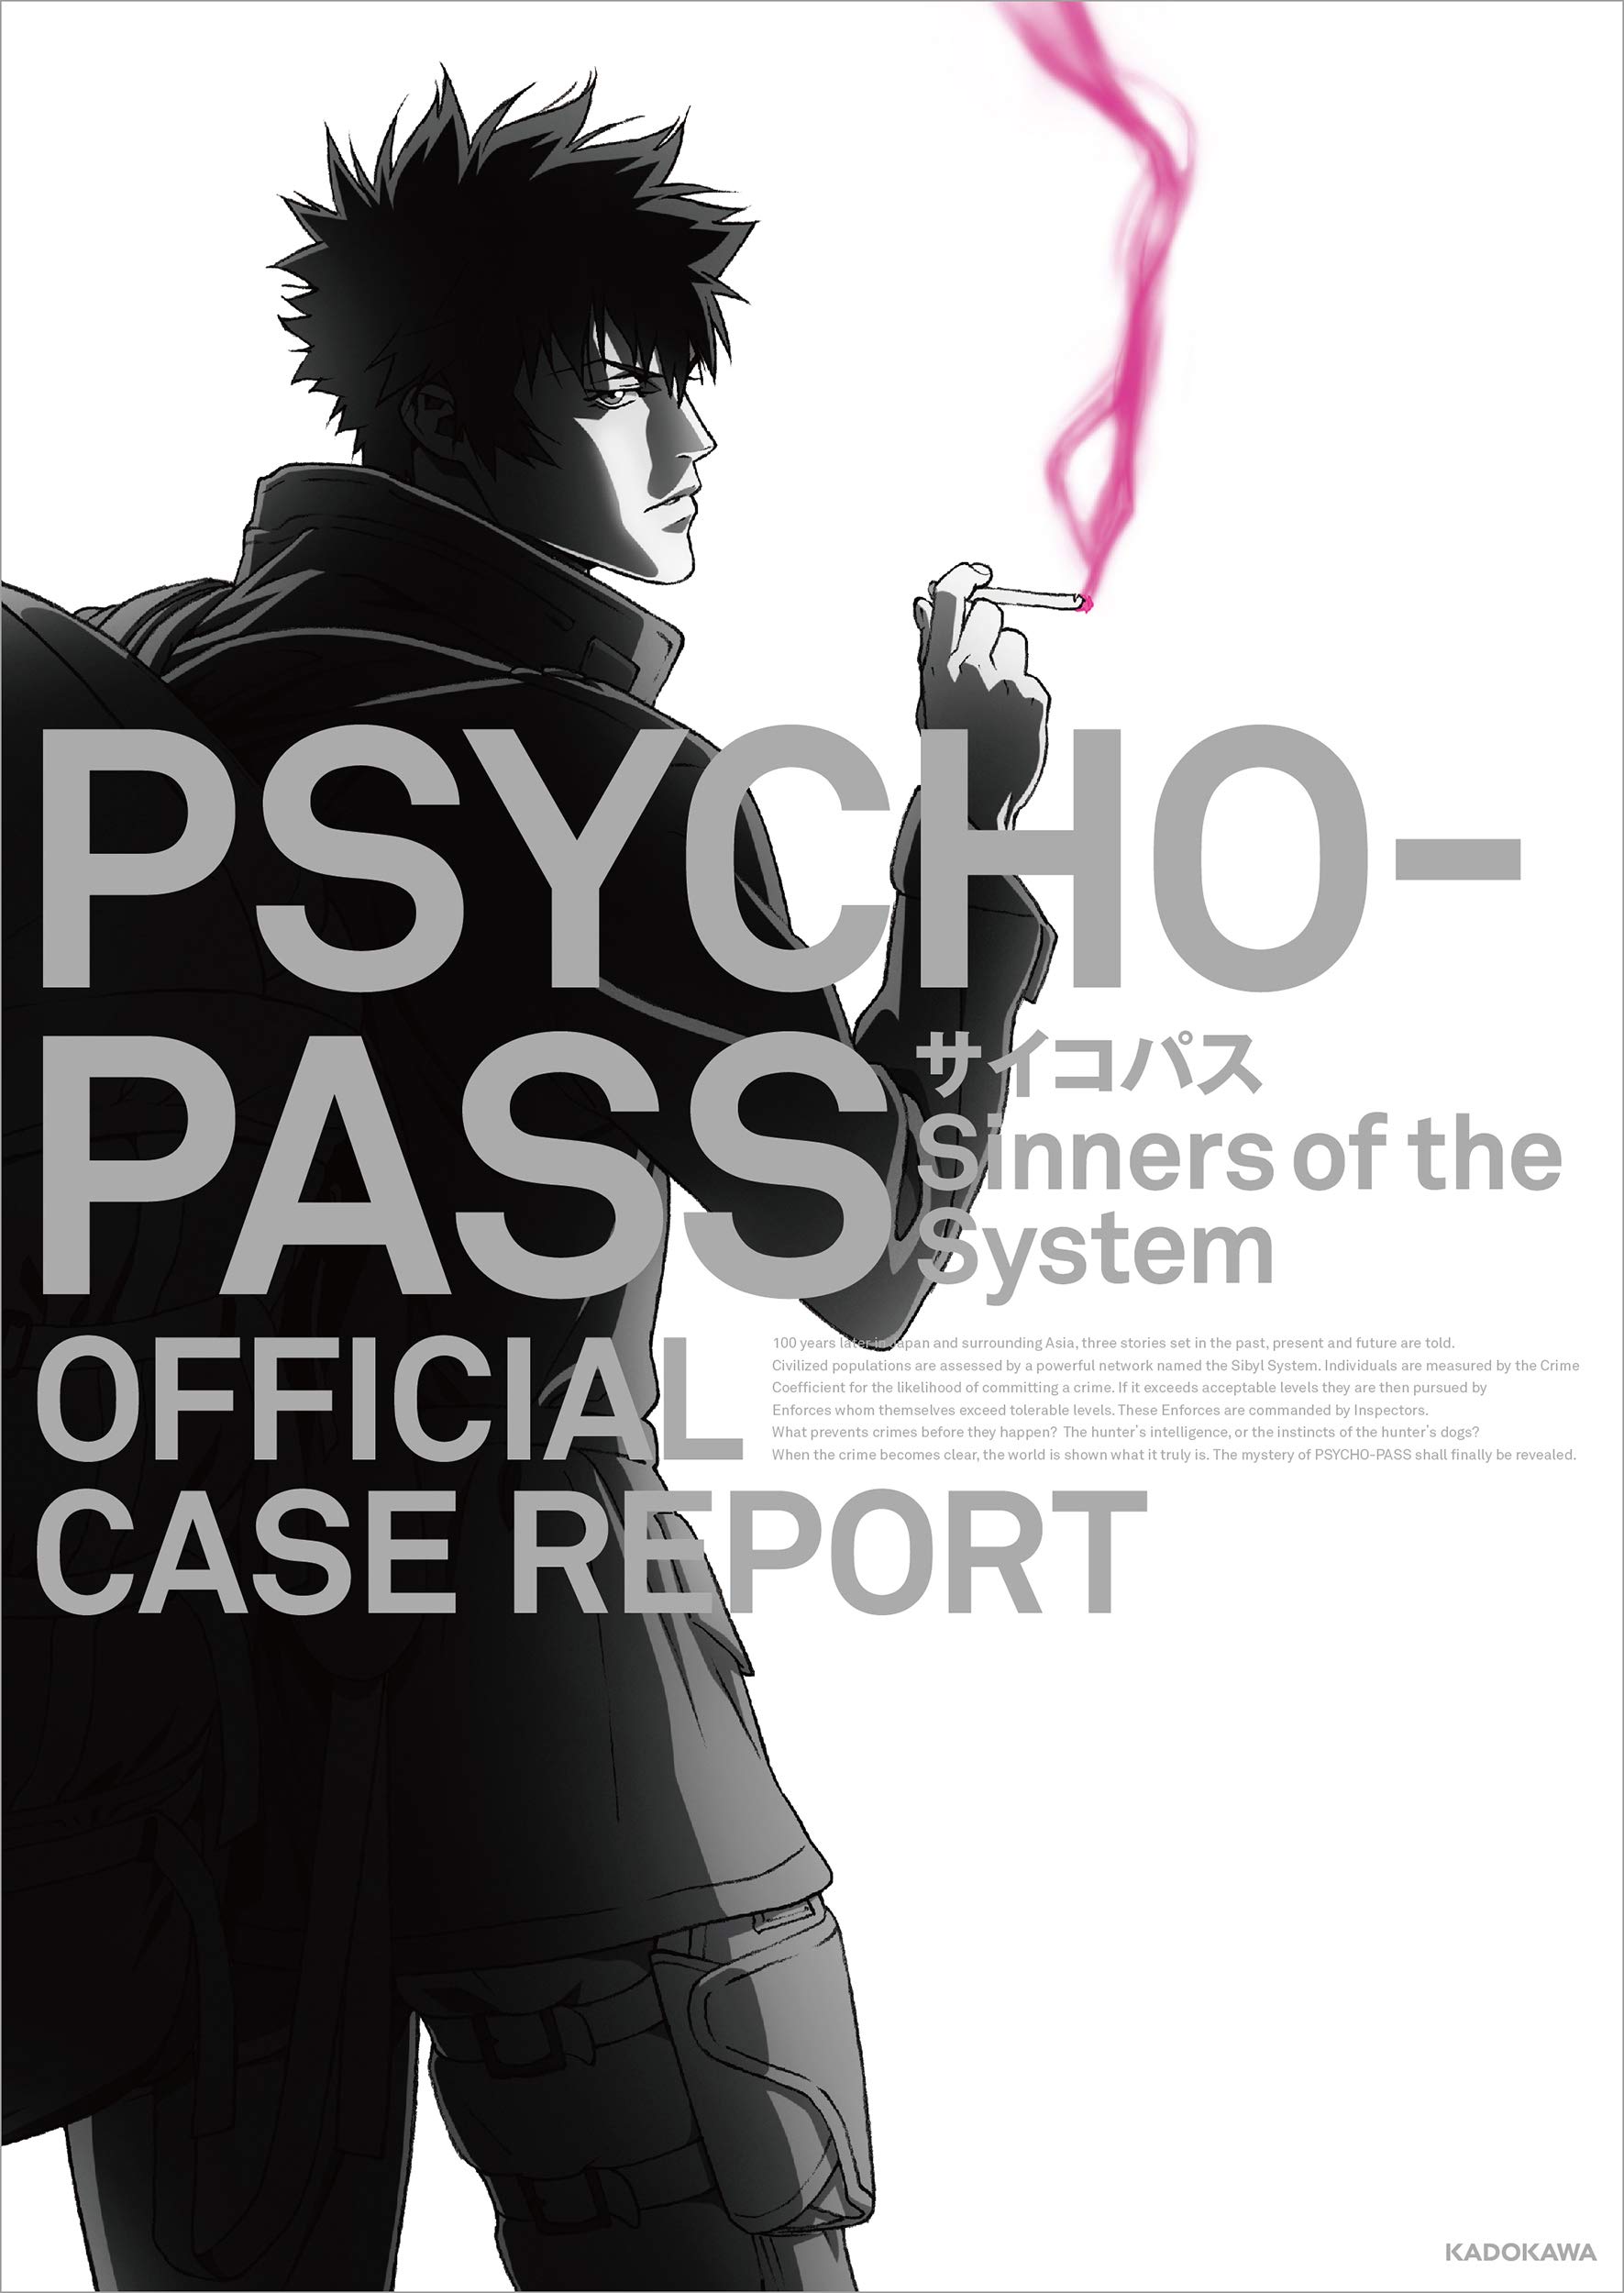 Sinners of the System: Official Case Report | Psycho-Pass Wiki 